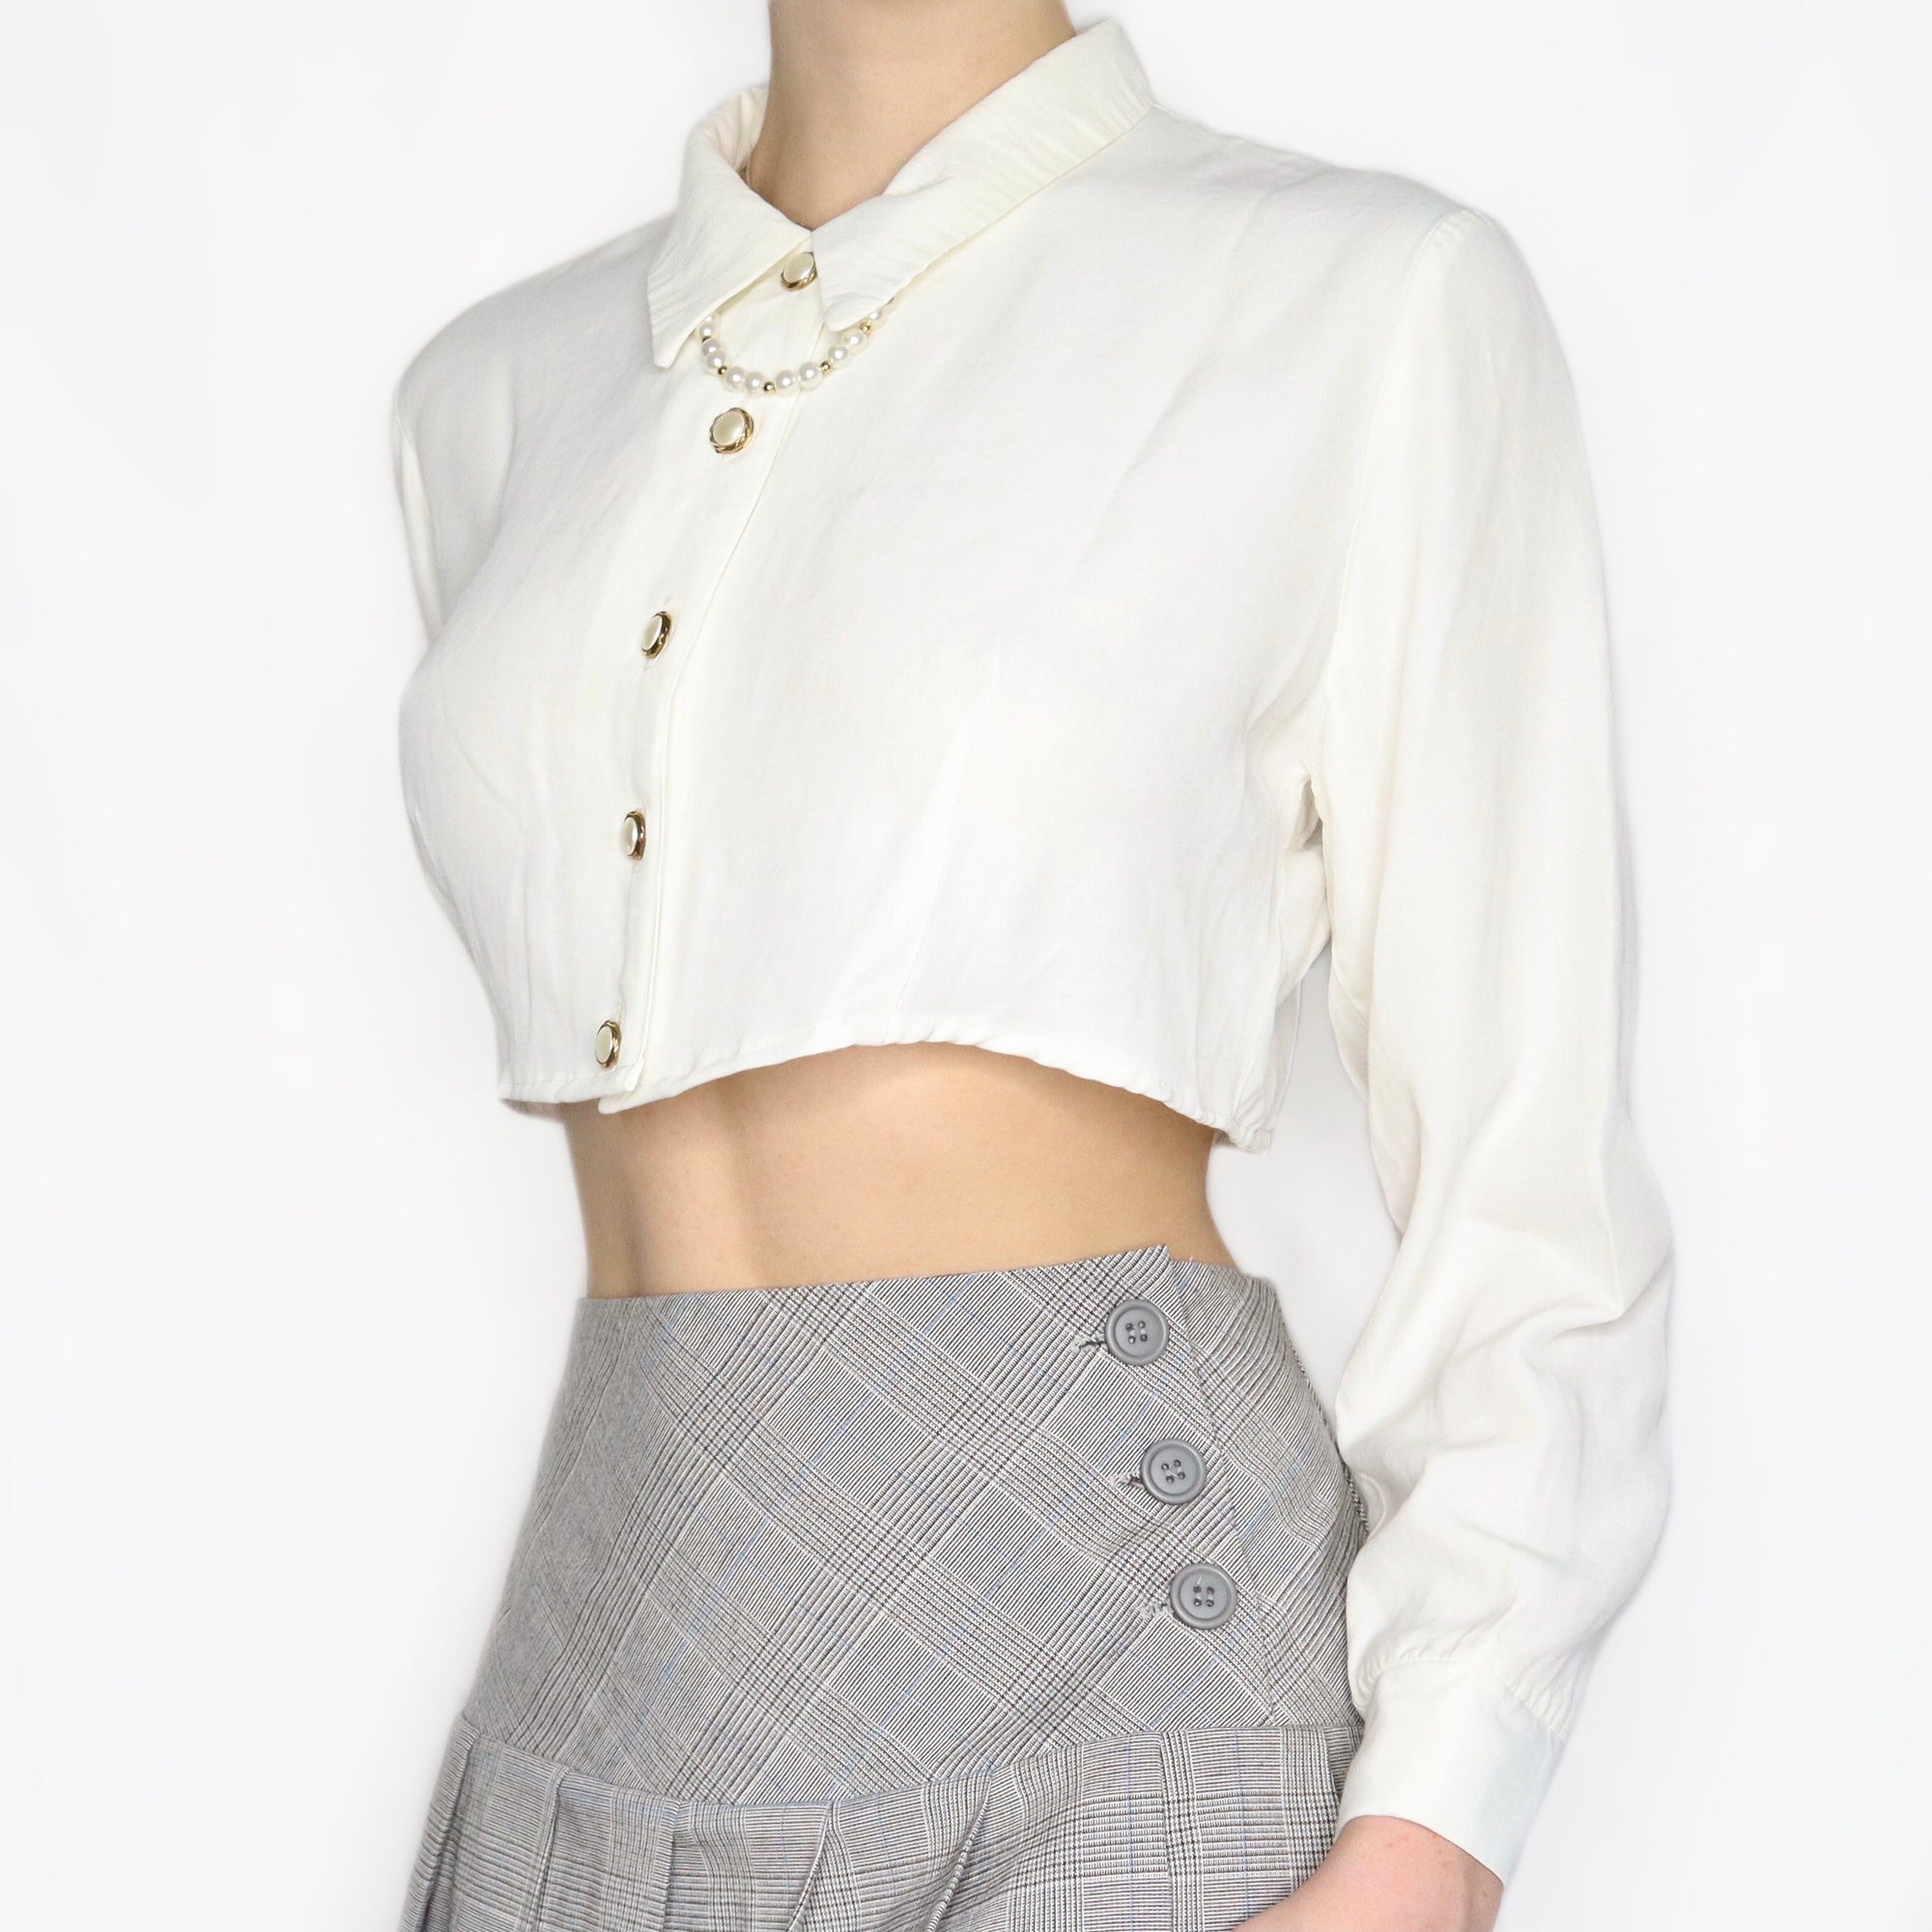 Vintage 80s Cropped White Blouse